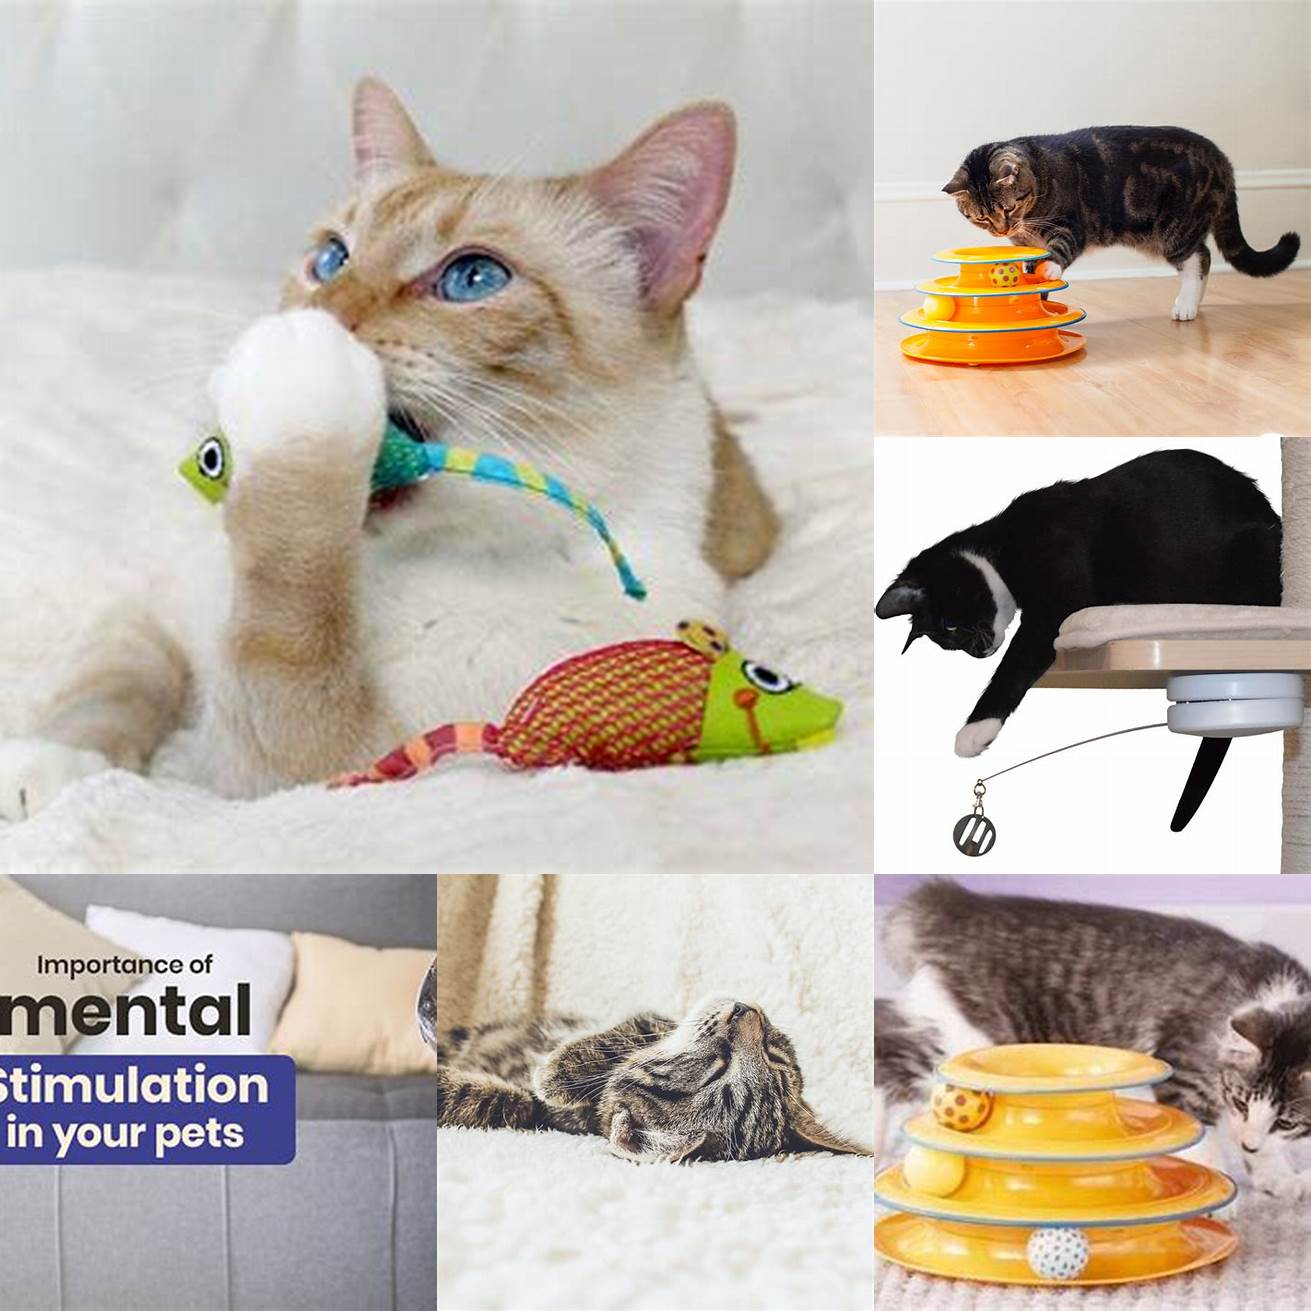 Give your cat plenty of exercise and mental stimulation